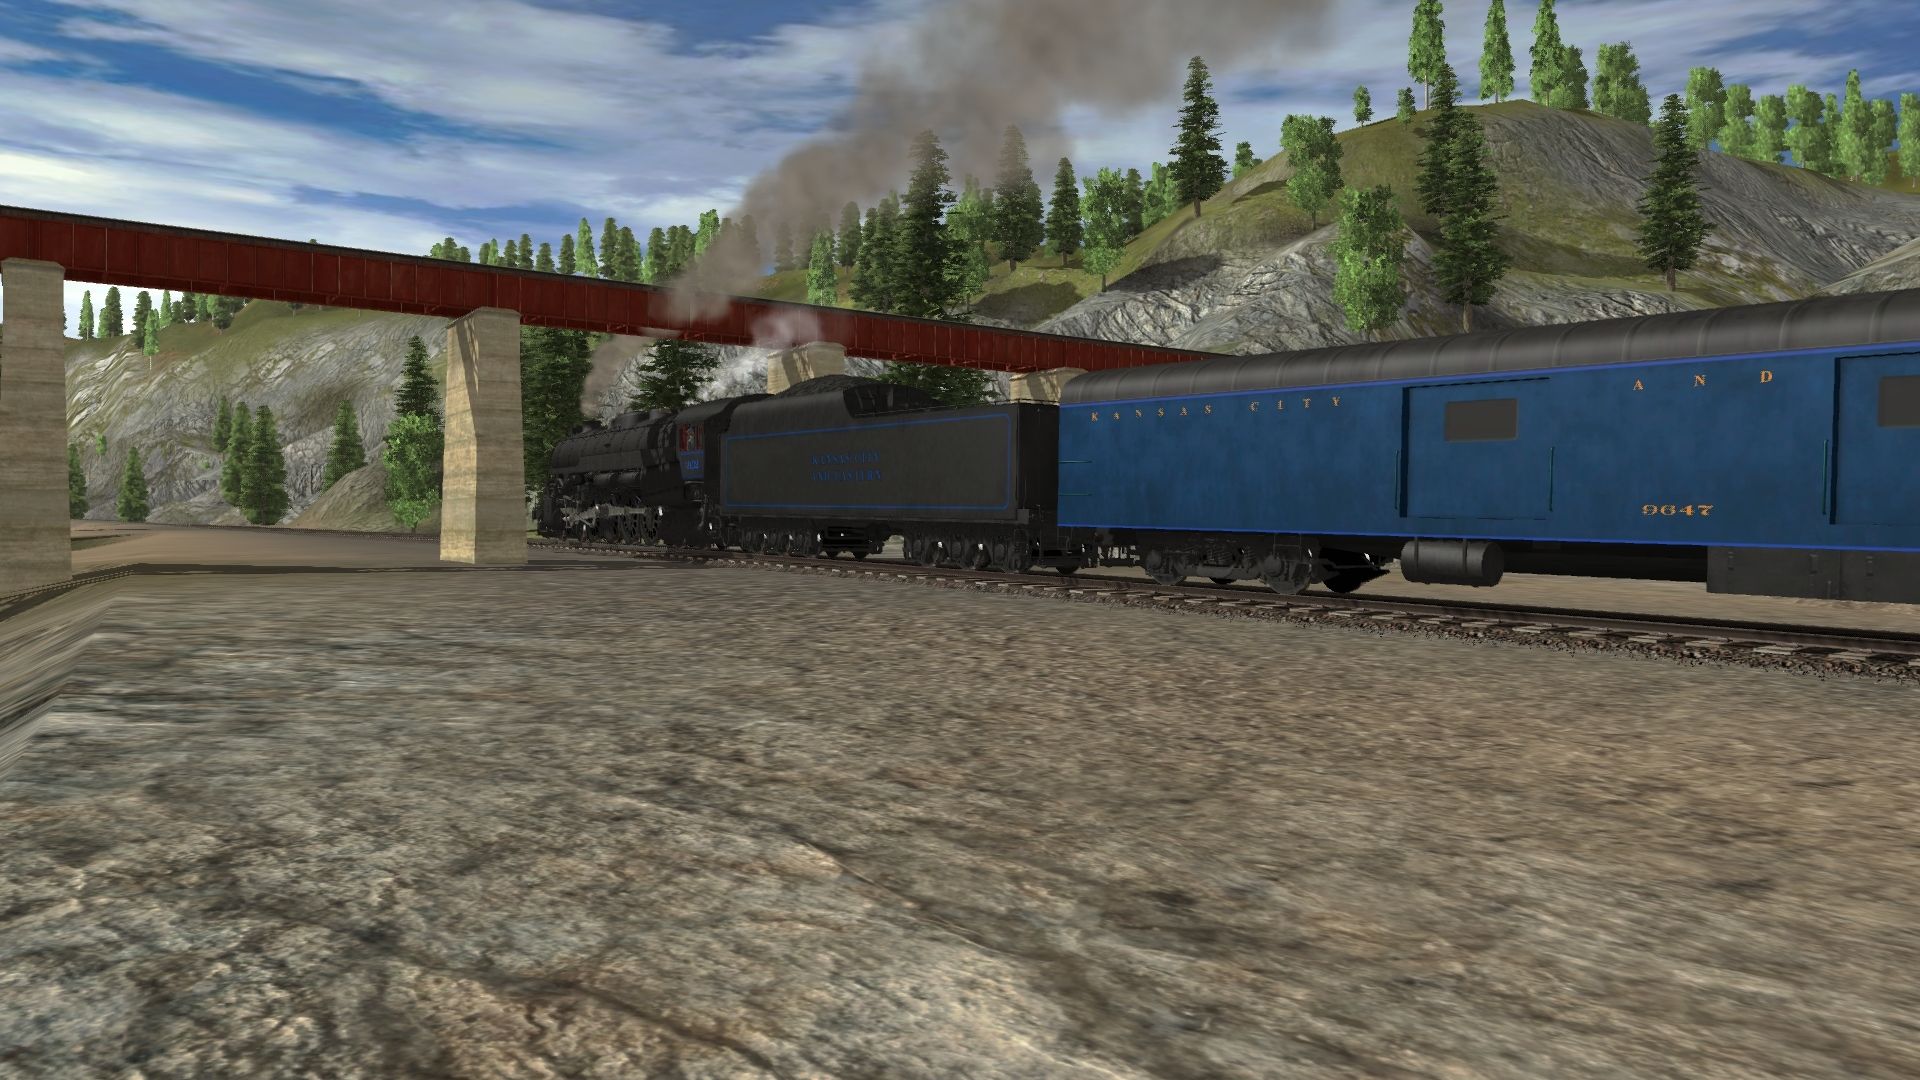 Passing-under-a-trestle%2C-the-locomotive-really-struggles-to-keep-speed-as-it-encounters-the-heavy-grade..jpg